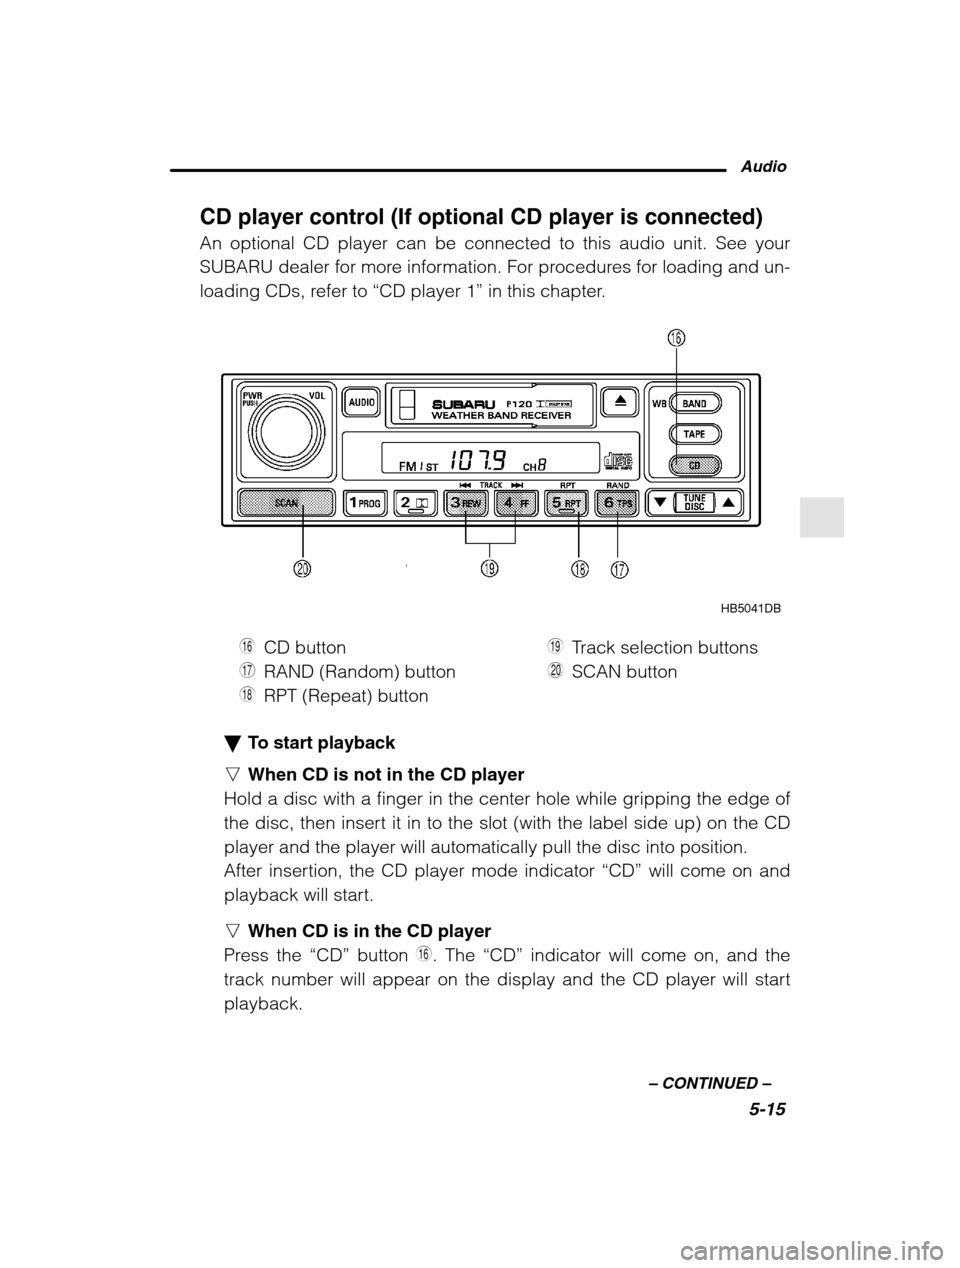 SUBARU LEGACY 2002 3.G Owners Manual Audio5-15
–
 CONTINUED  –
CD player control (If optional CD player is connected) An optional CD player can be connected to this audio unit. See your 
SUBARU dealer for more information. For proced